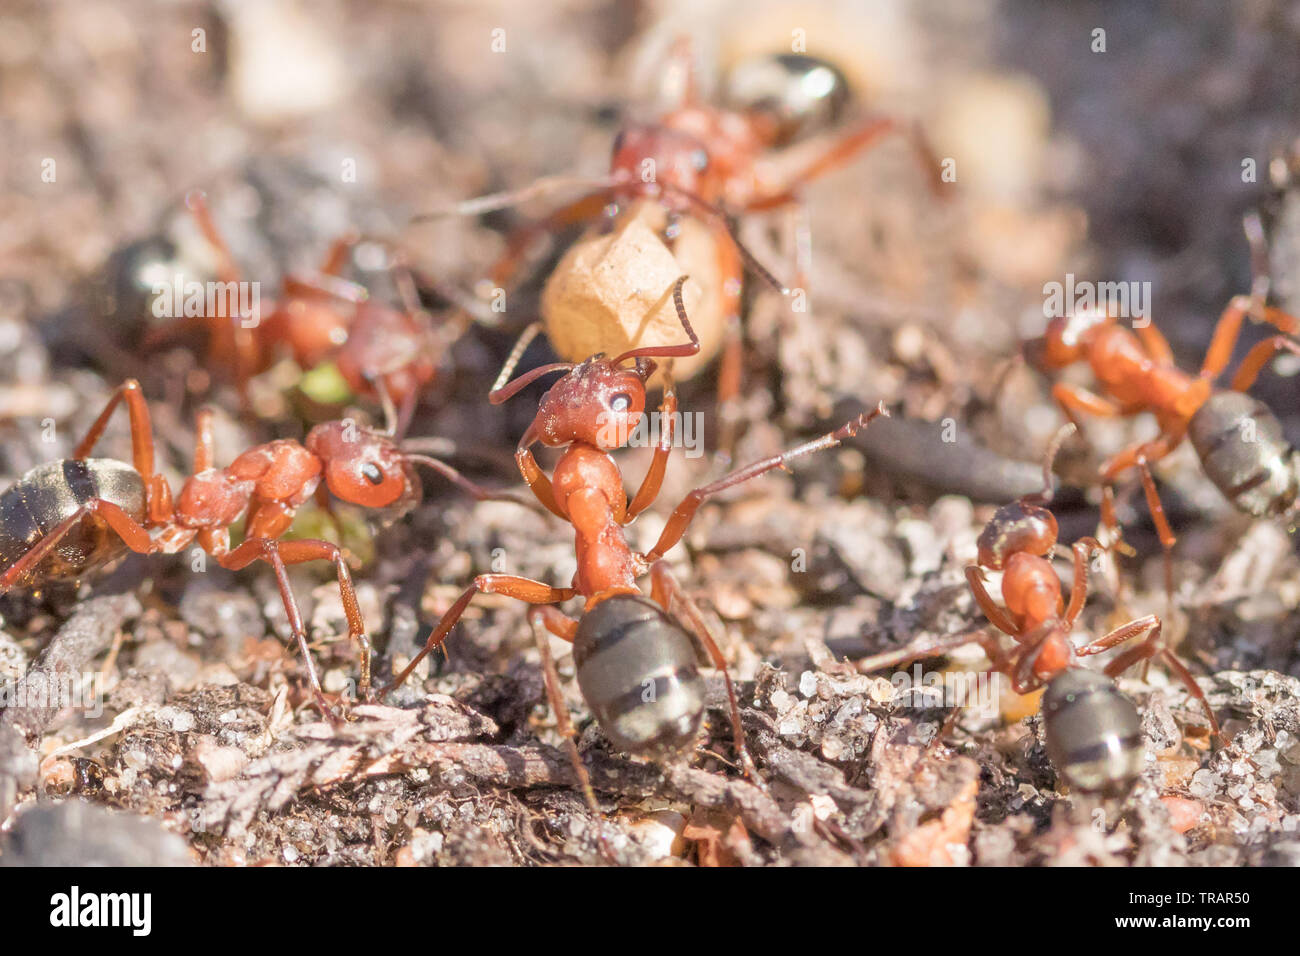 Blood-red slave making ants (Formica sanguinea) raiding another ant nest. Surrey, UK. Stock Photo